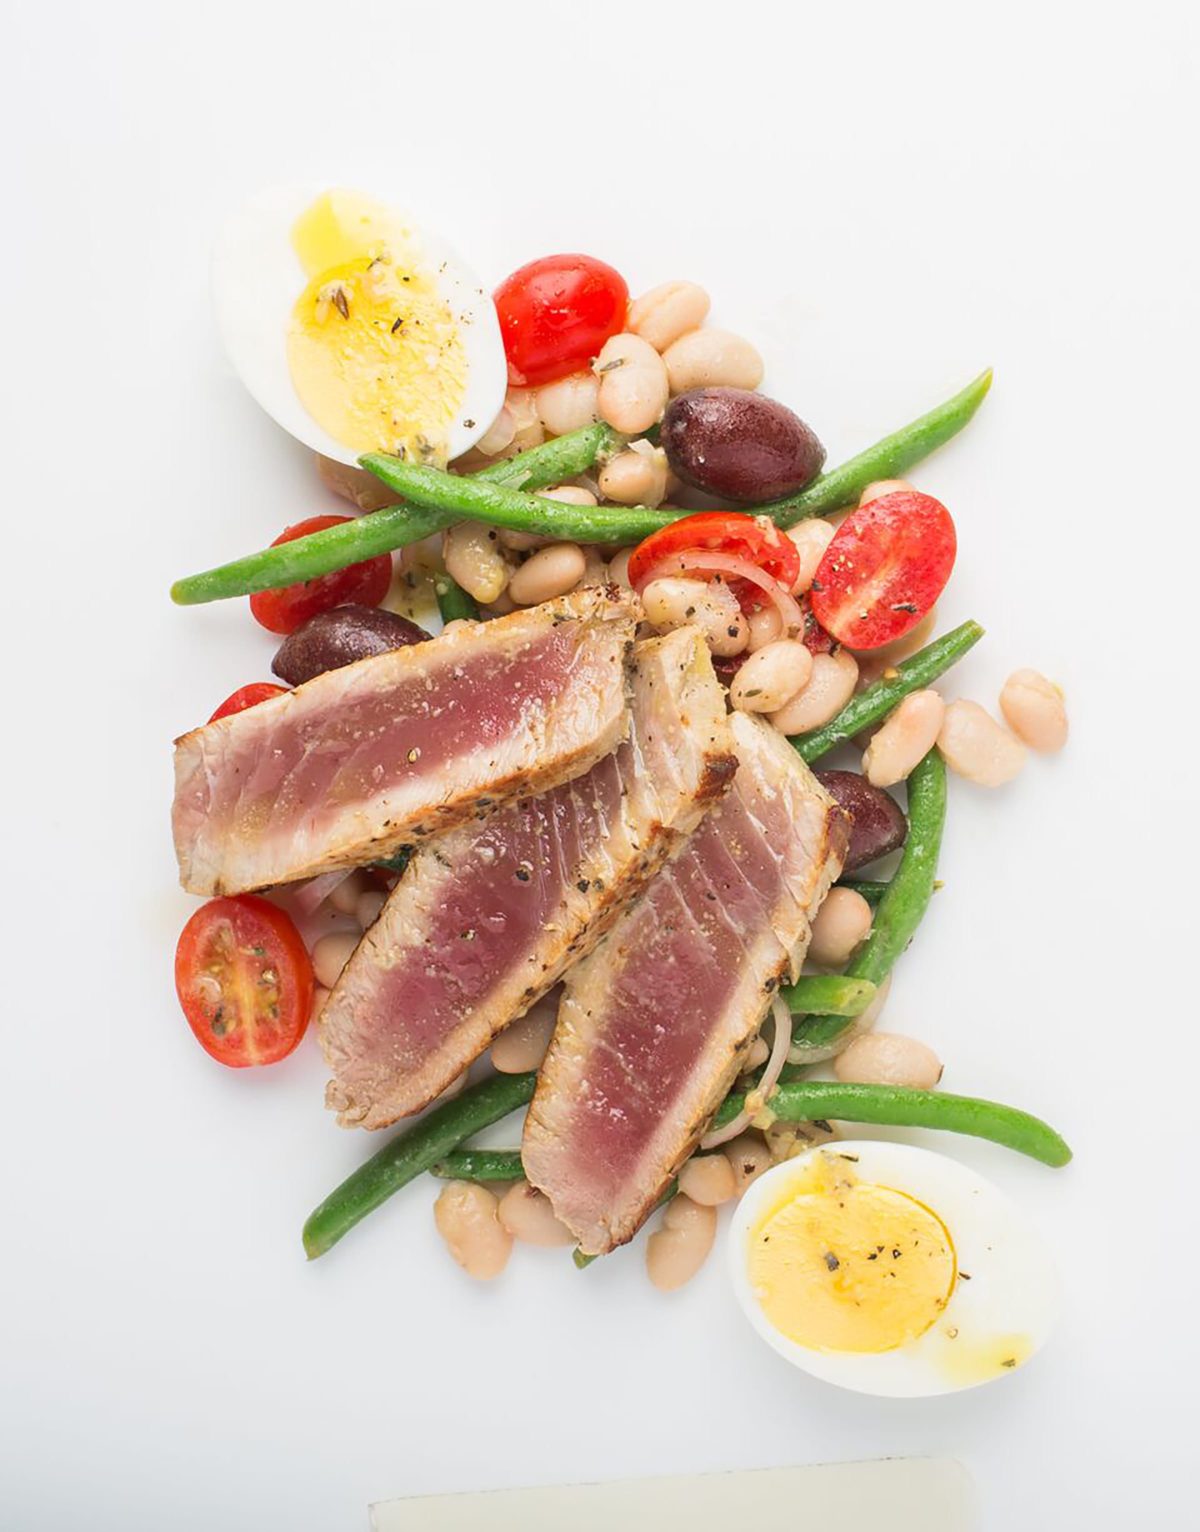 Tuna Nicoise Salad is the Perfect Quick Gluten Free Dinner